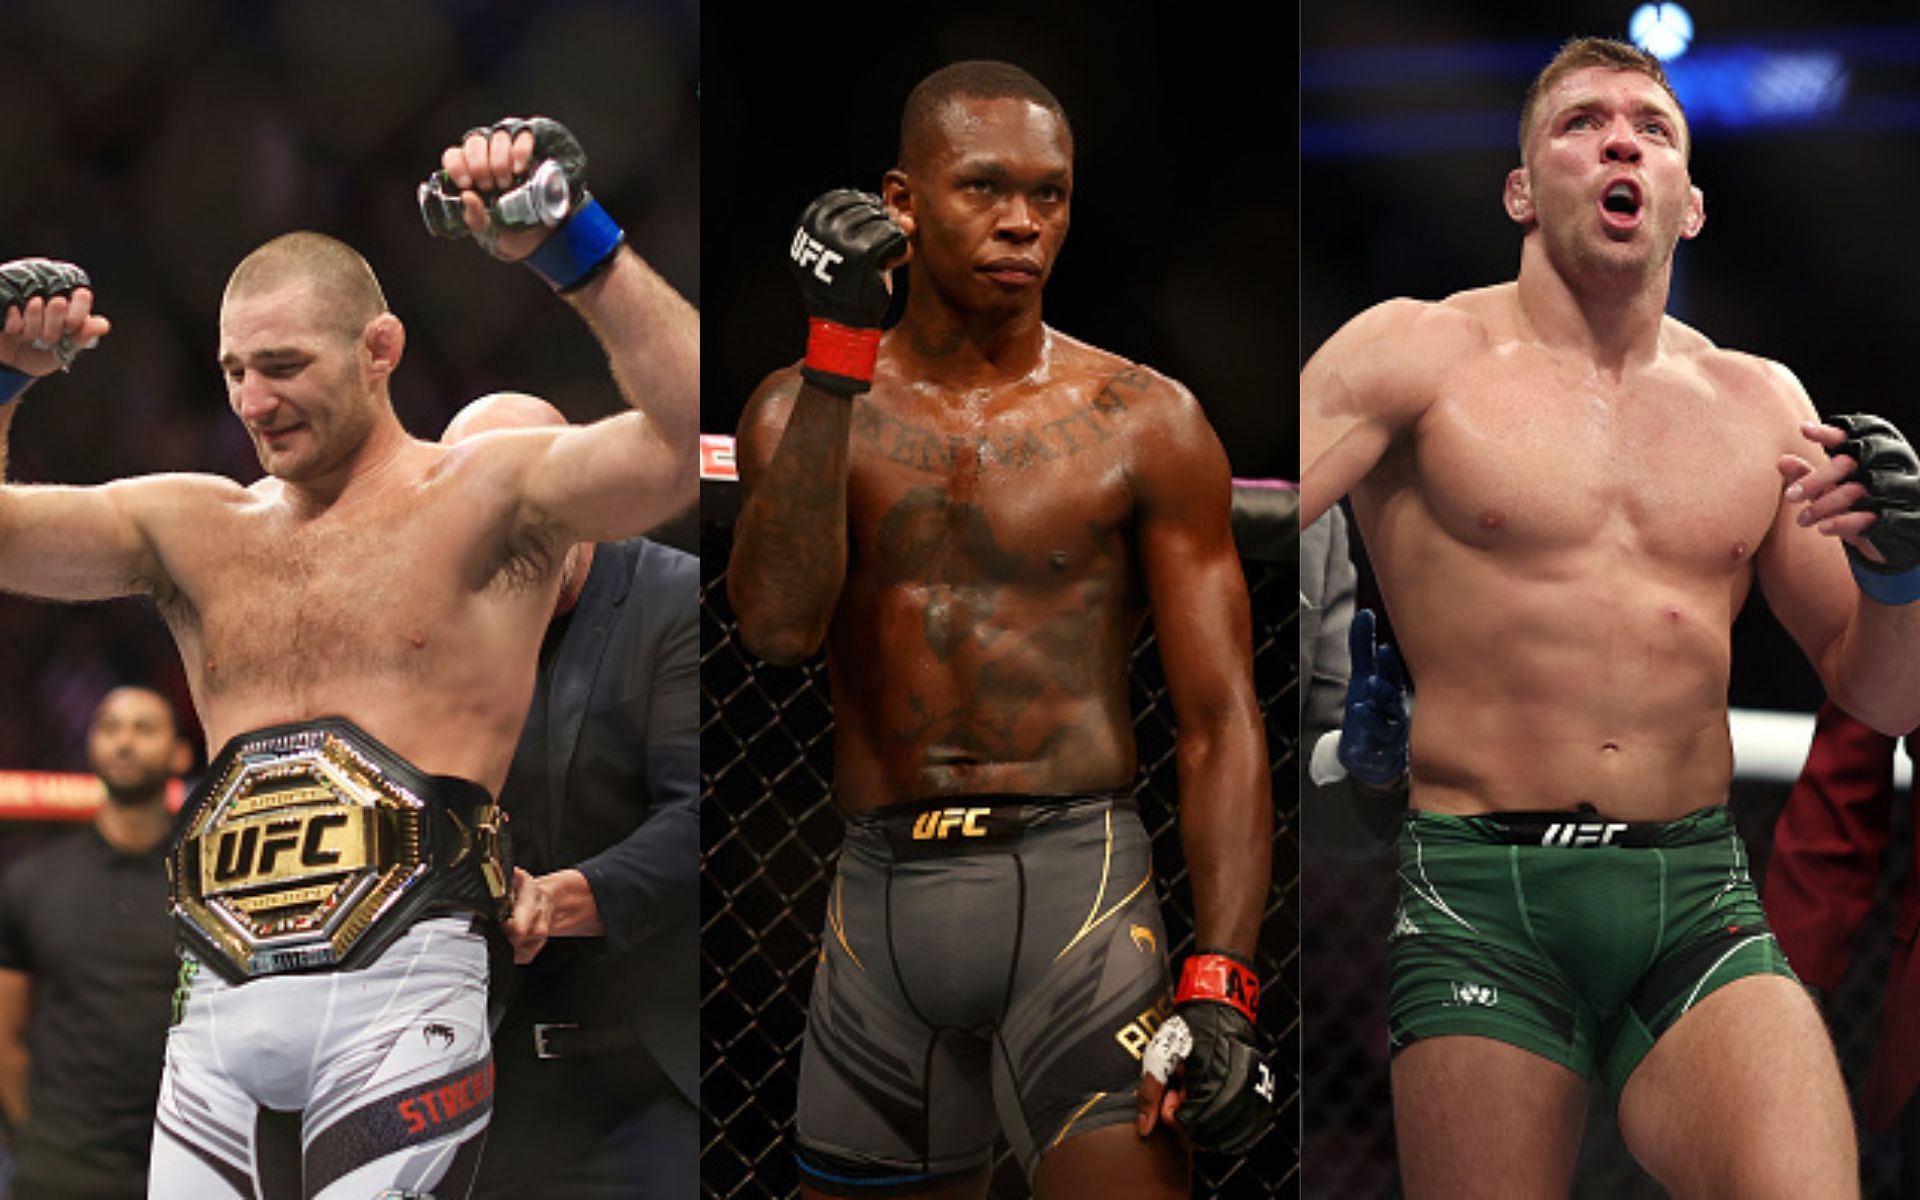 From left to right: Sean Strickland, Israel Adesanya, Dricus du Plessis